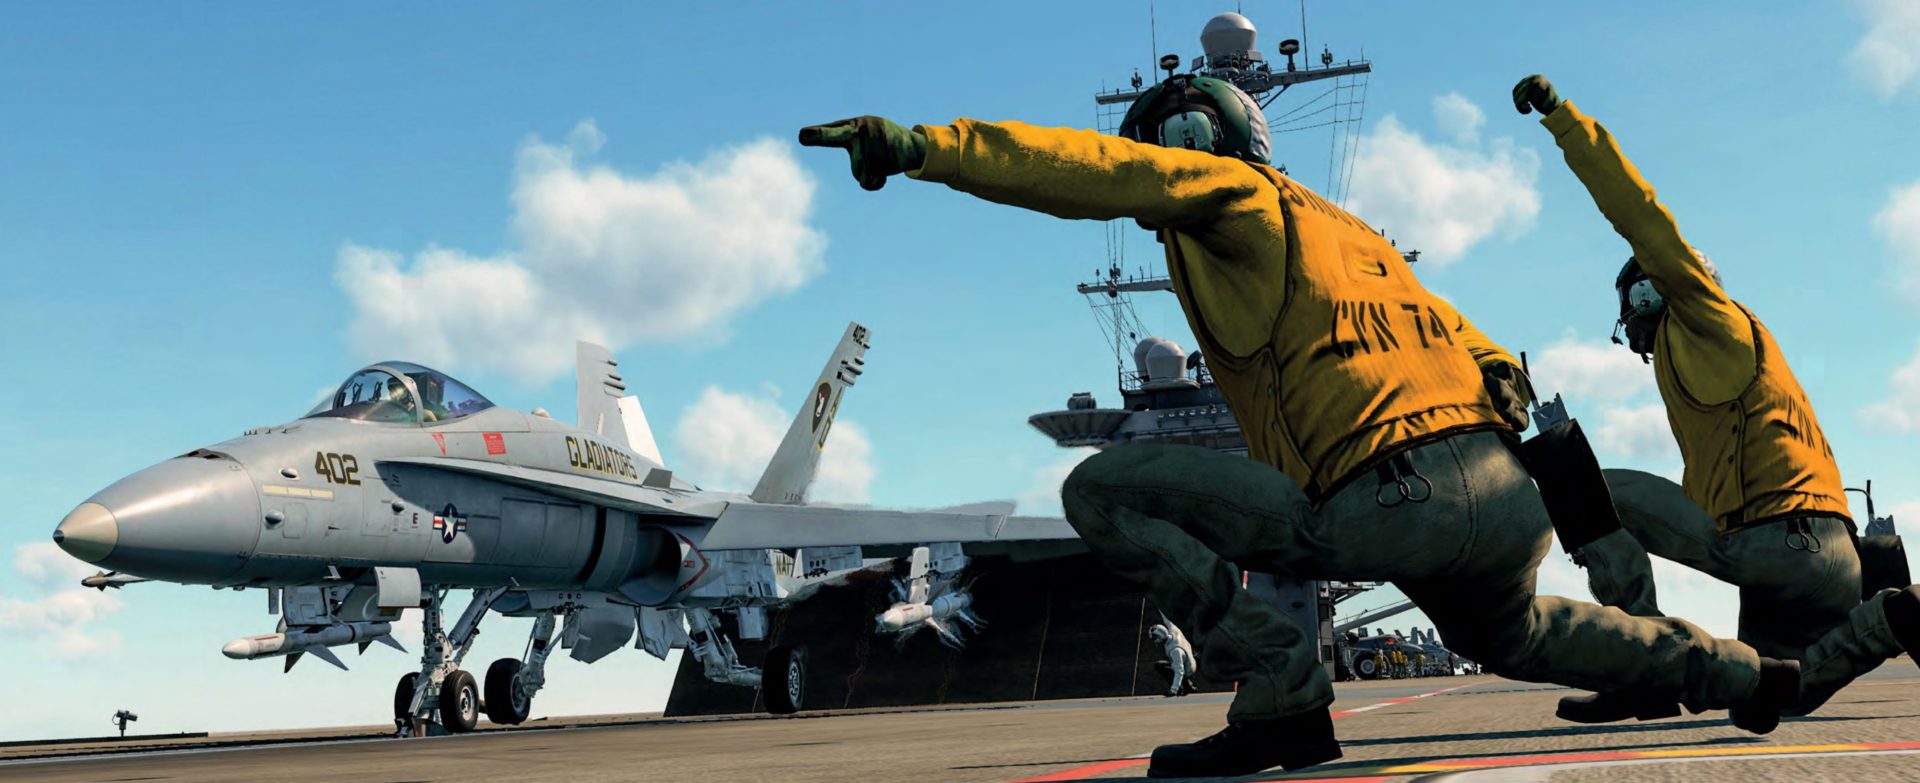 DCS World Super Carriers Animated Crew Cropped